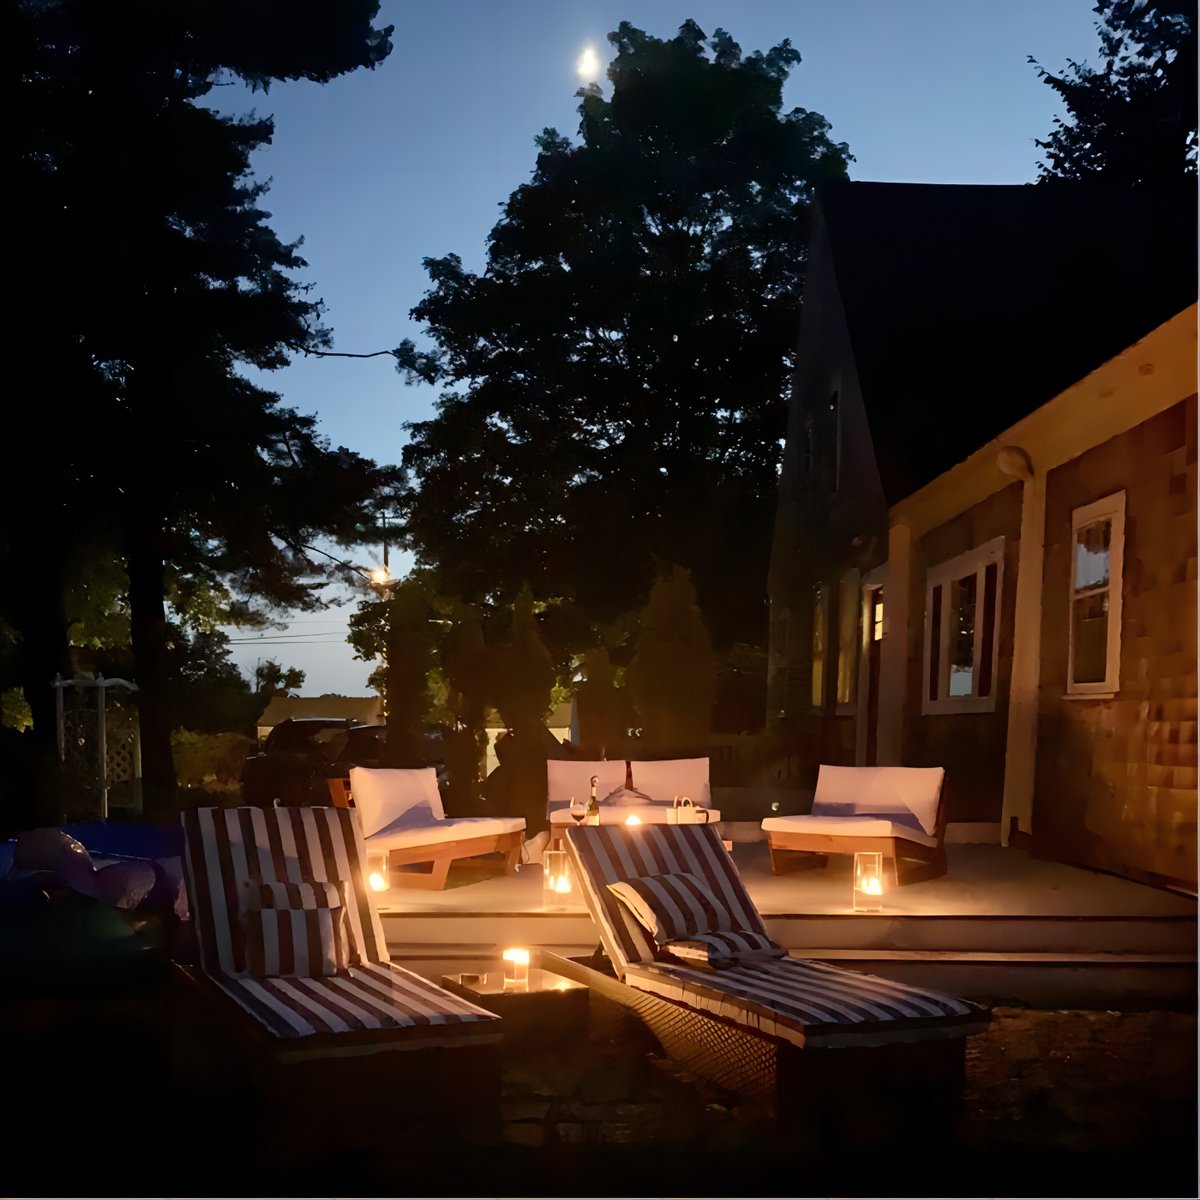 Embrace the magic of the night and let it weave its enchantment.🌕
#heynemo
.
.
.
.
.
#gardendesign #backyarddesign #exteriorstyle #sofaset #exteriors #gardeninspo #backyard #outdoorlife #outdooroasis #outdoorliving #outdoorspace #outdoorfurniture #home #homedecor